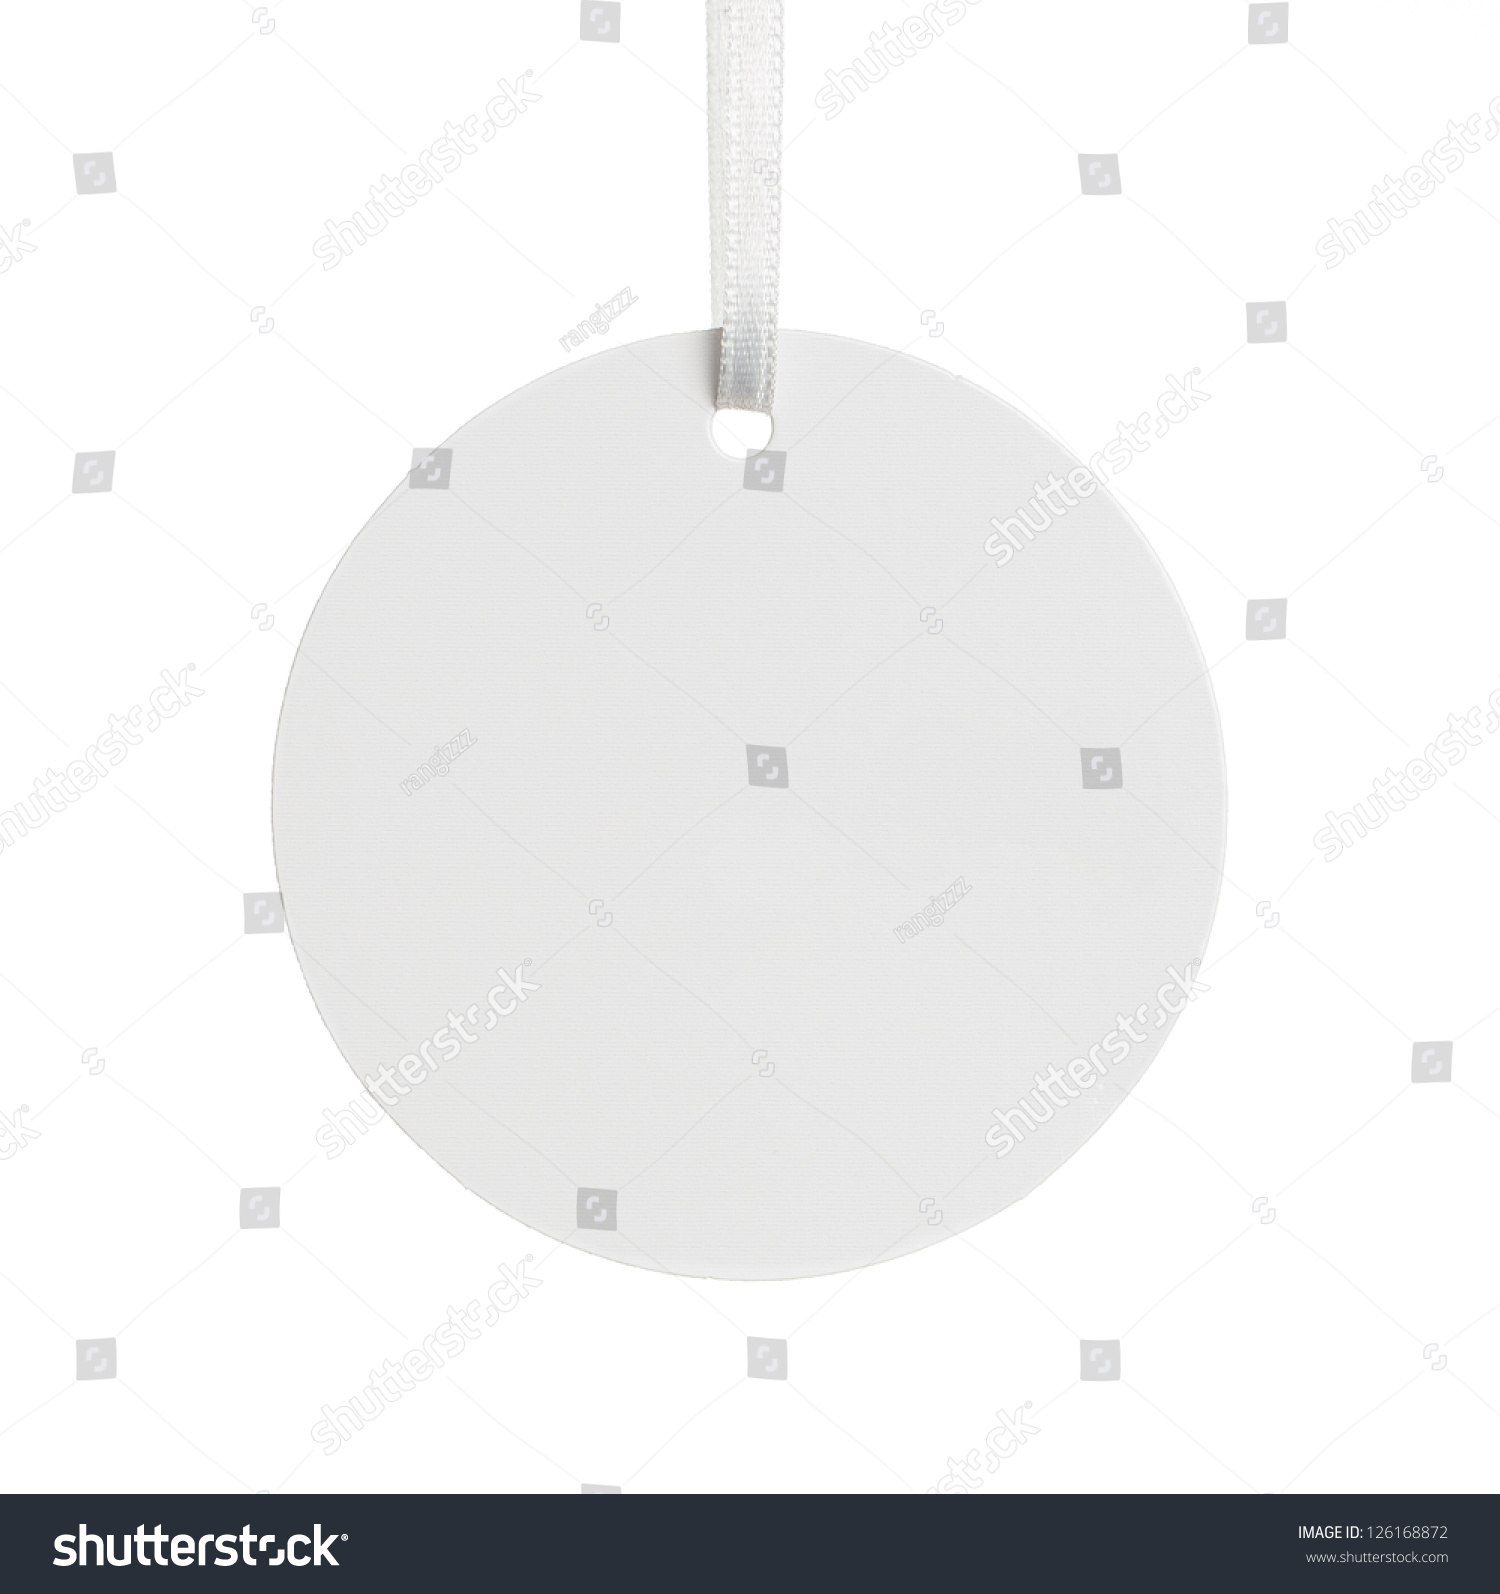 Blank paper price tag isolated on white background with copy space #126168872